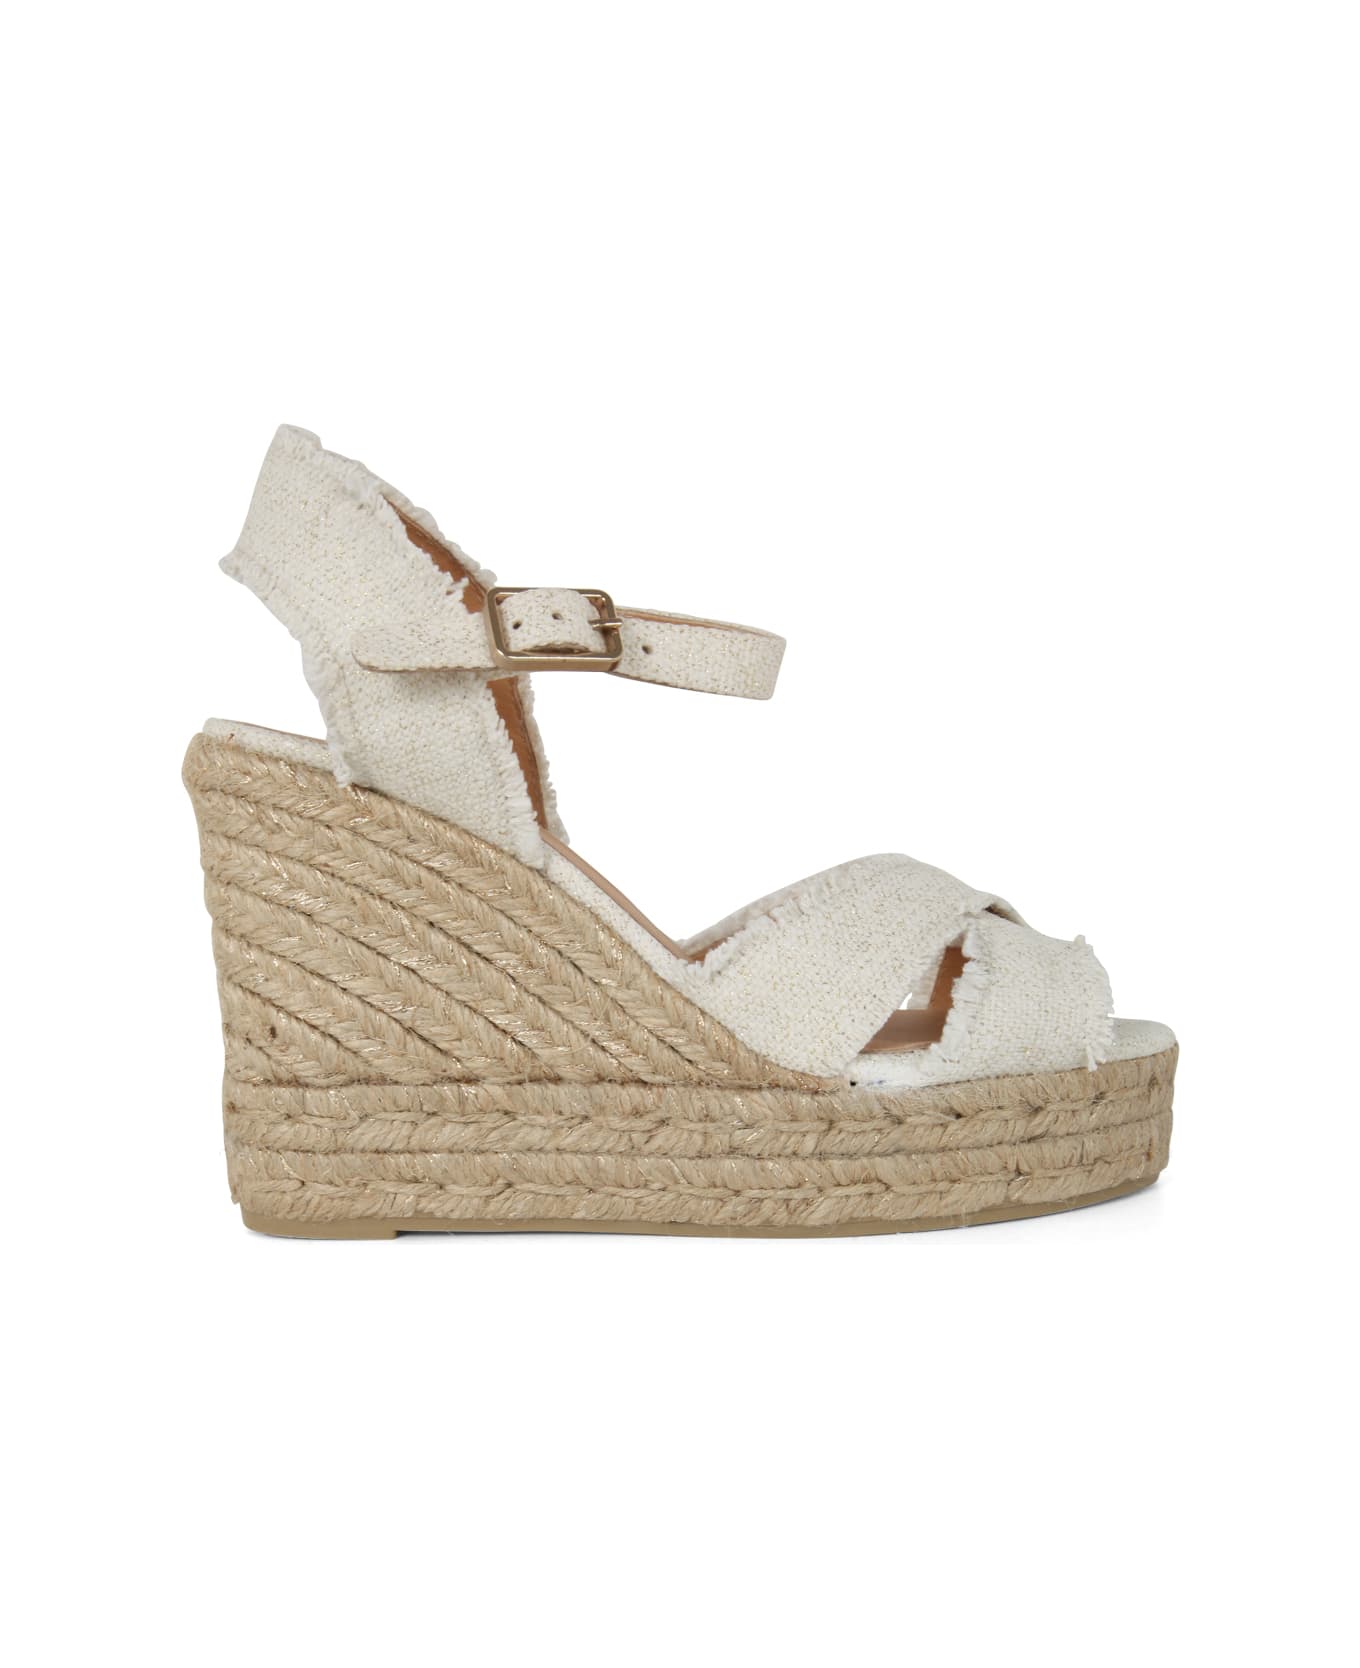 Castañer Bromelia Espadrilles With Belt On Ankles And Fringed Ankles - White Gold